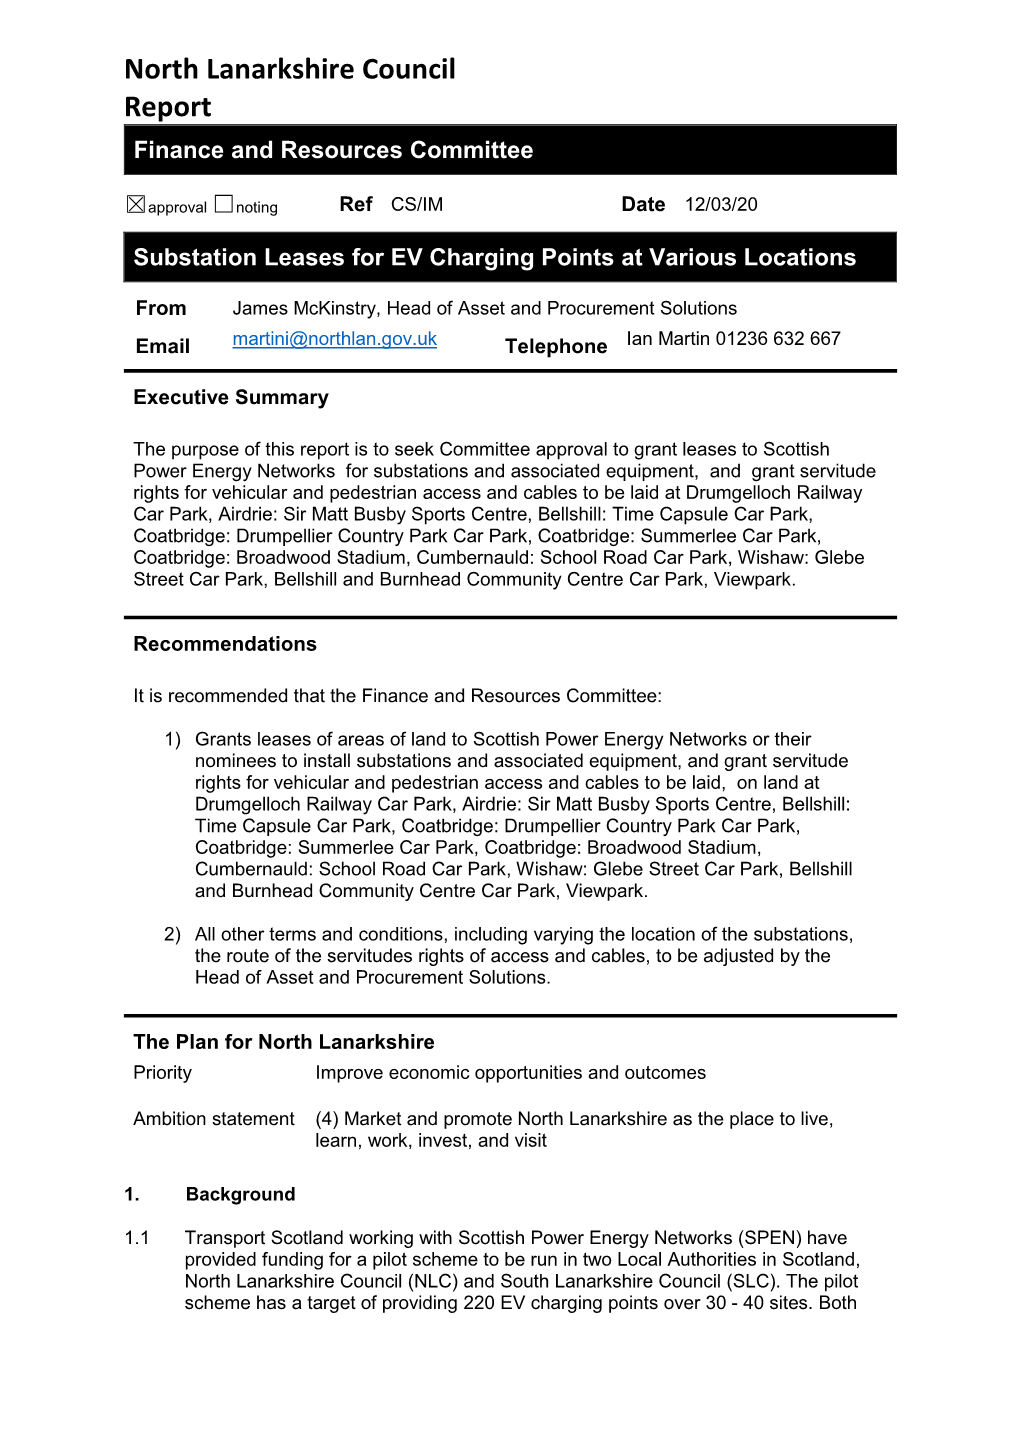 Substation Leases for Electric Vehicle